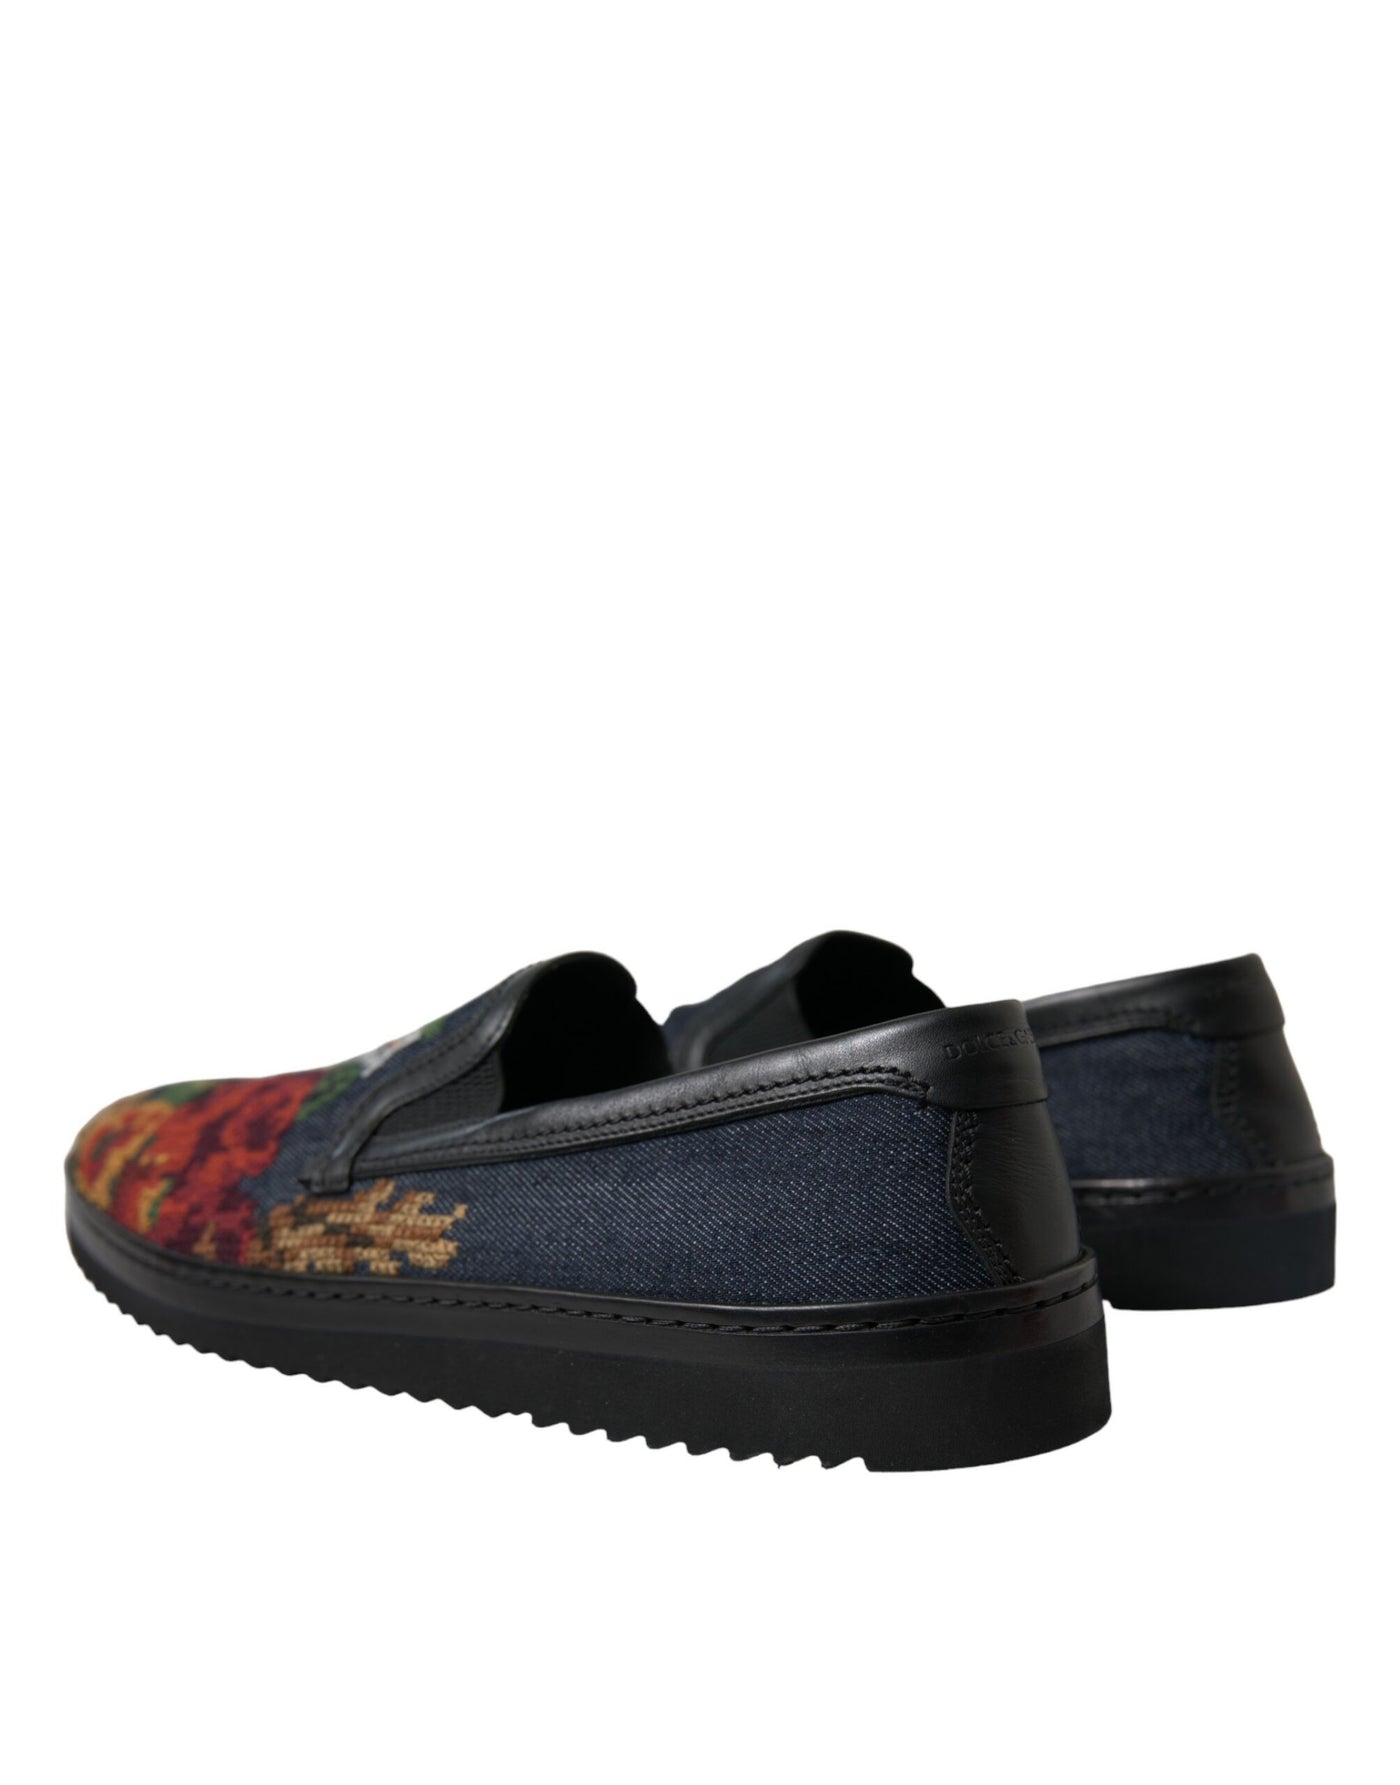 Dolce & Gabbana Multicolor Floral Slippers Men Loafers Shoes